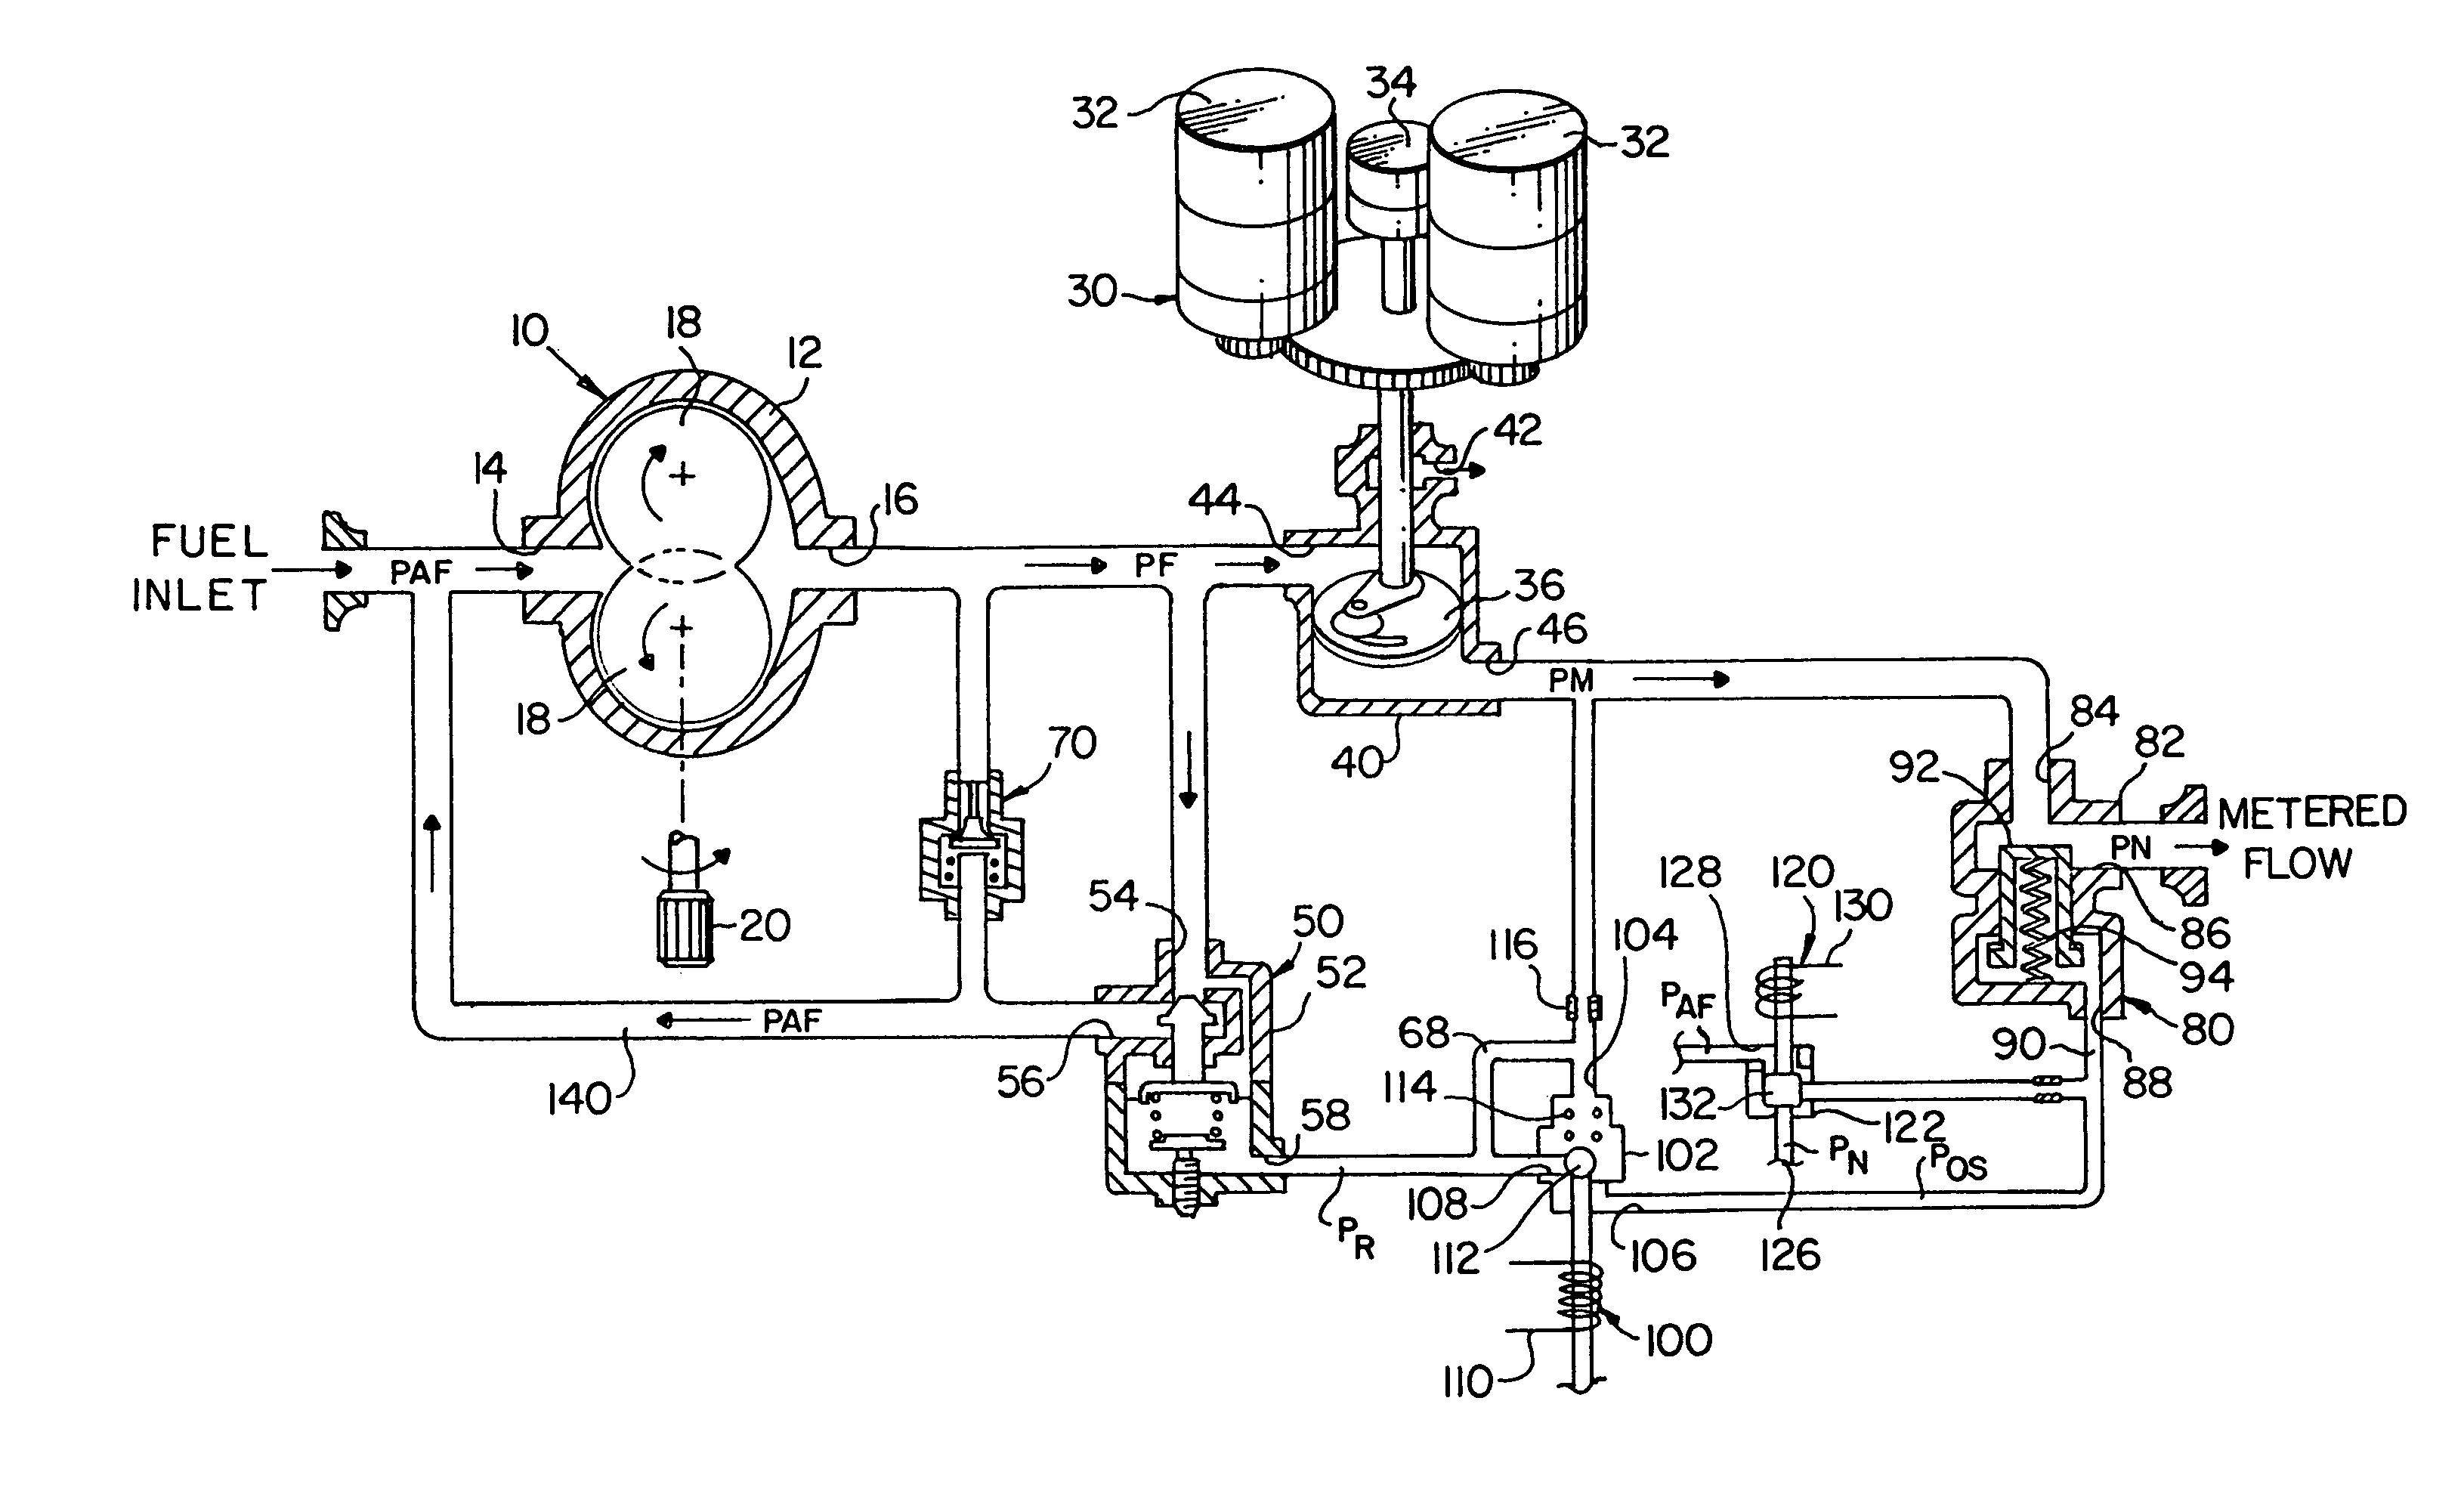 Multi-mode shutdown system for a fuel metering unit